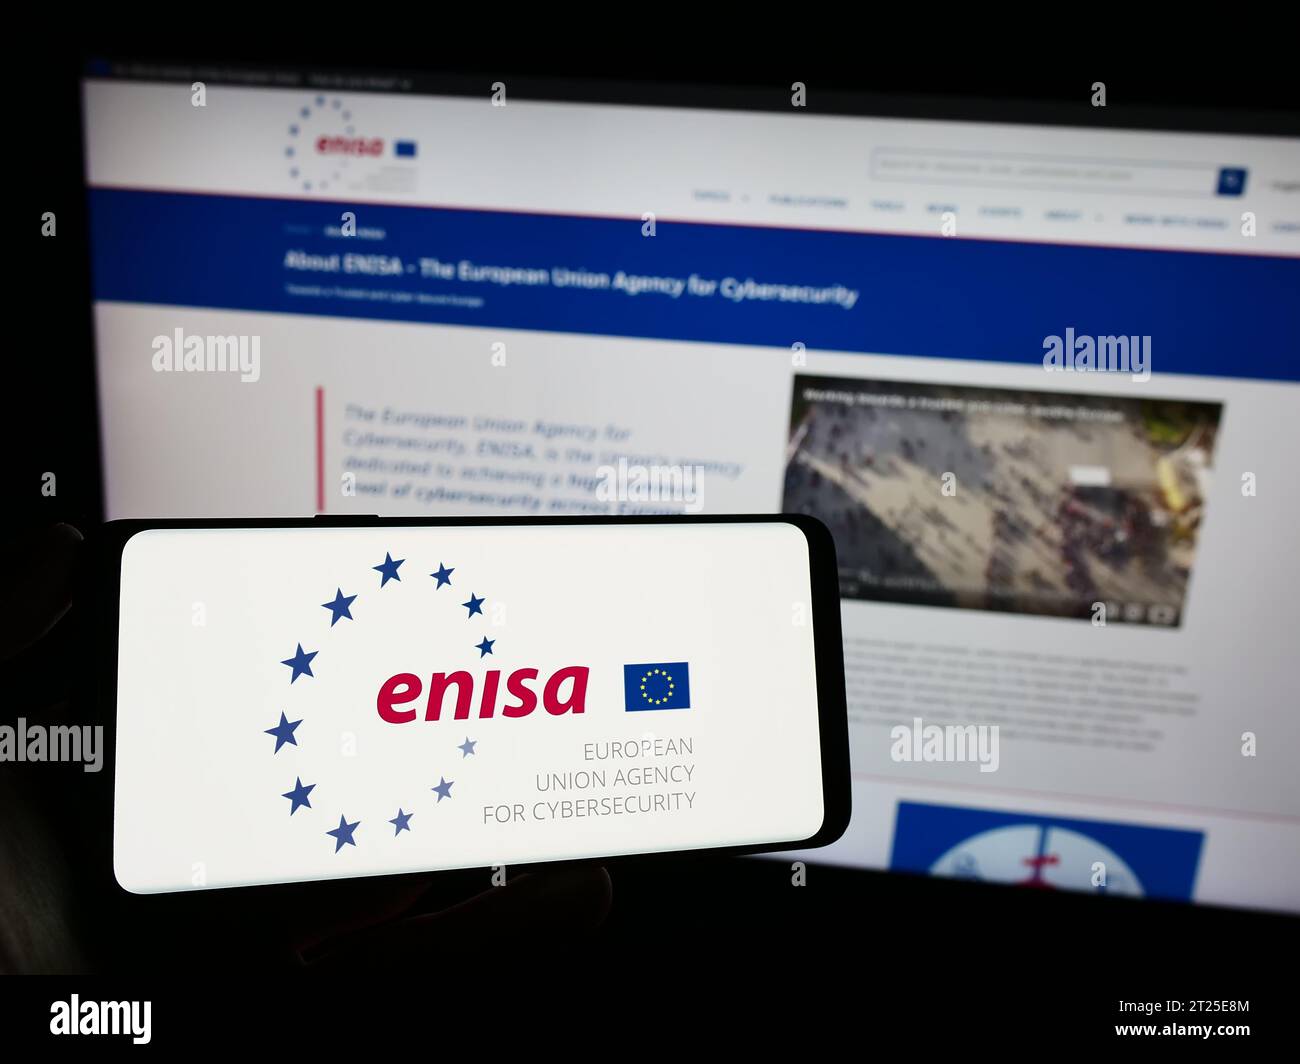 Person holding mobile phone with logo of European Union Agency for Cybersecurity (ENISA) in front of web page. Focus on phone display. Stock Photo